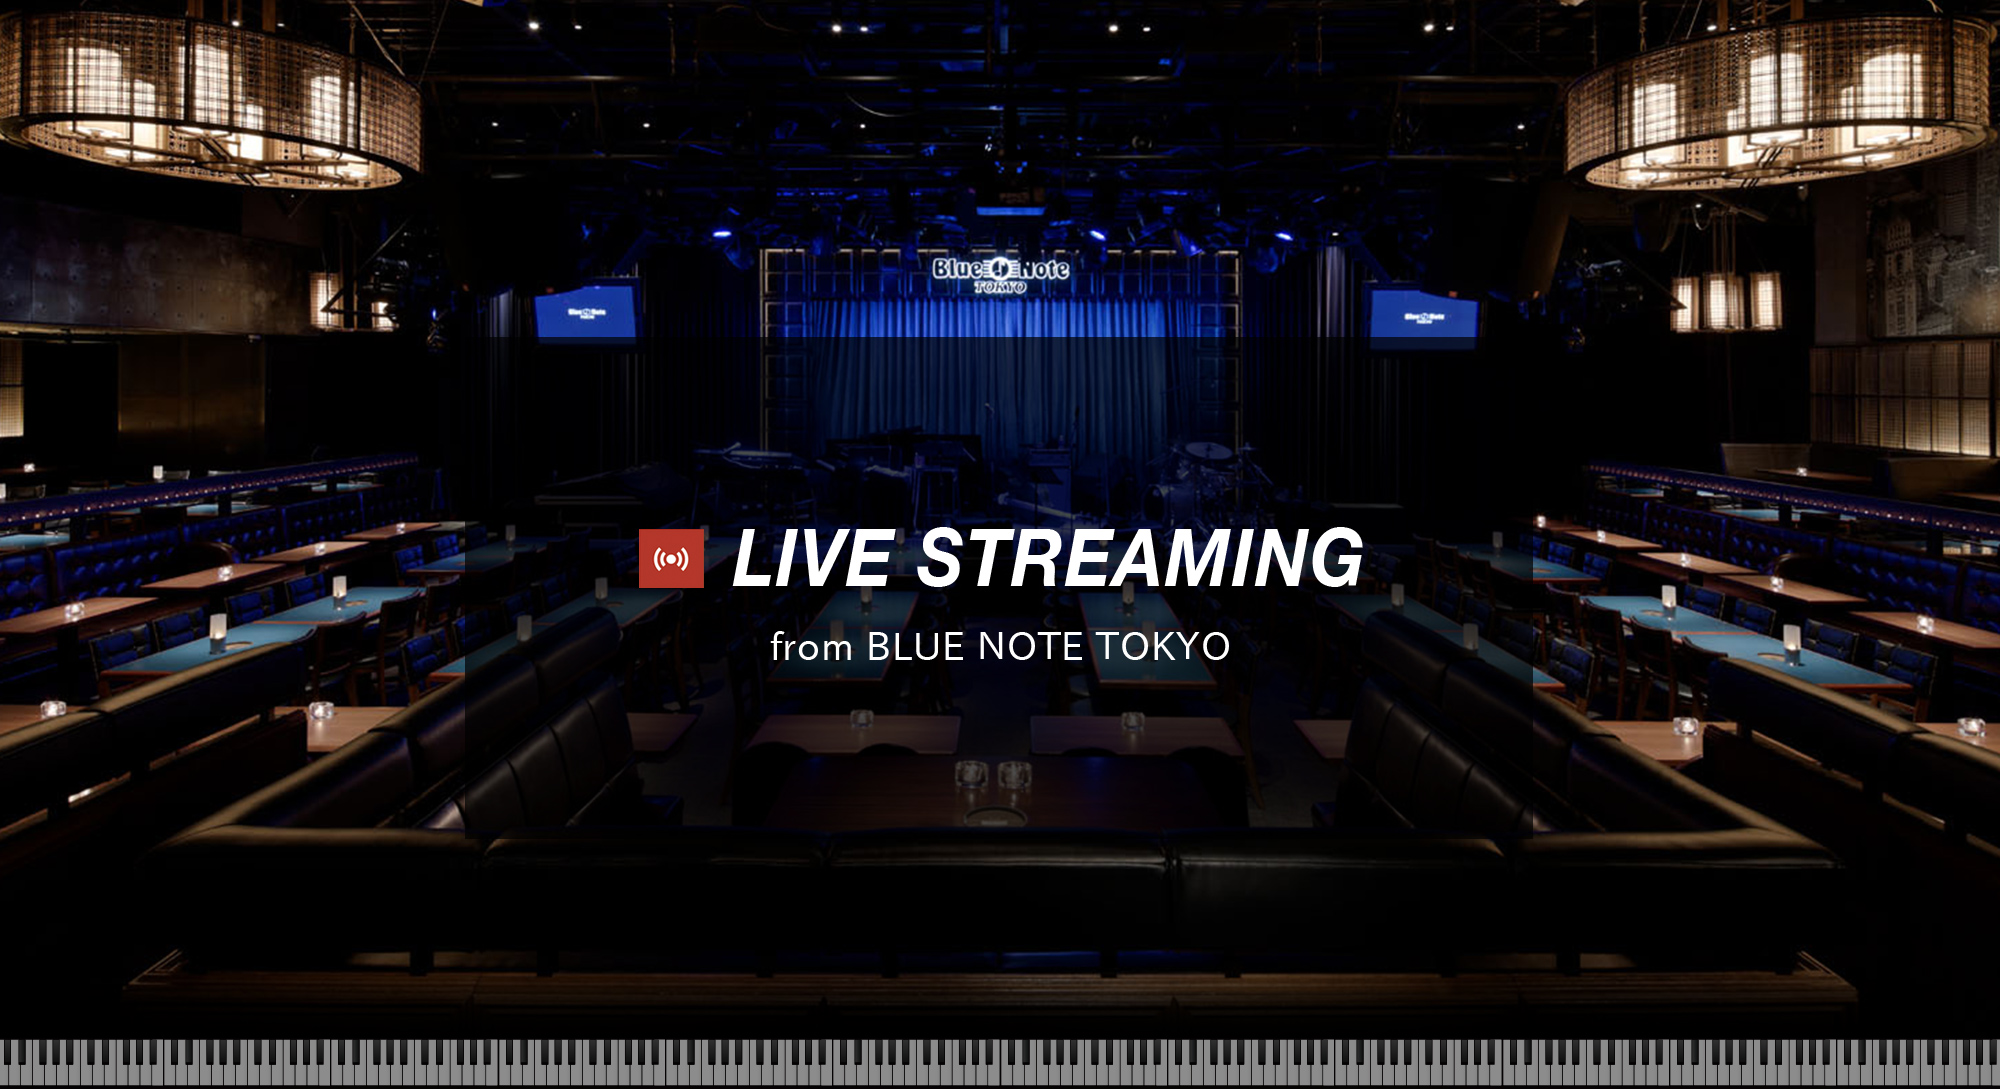 LIVE STREAMING at BLUE NOTE TOKYO